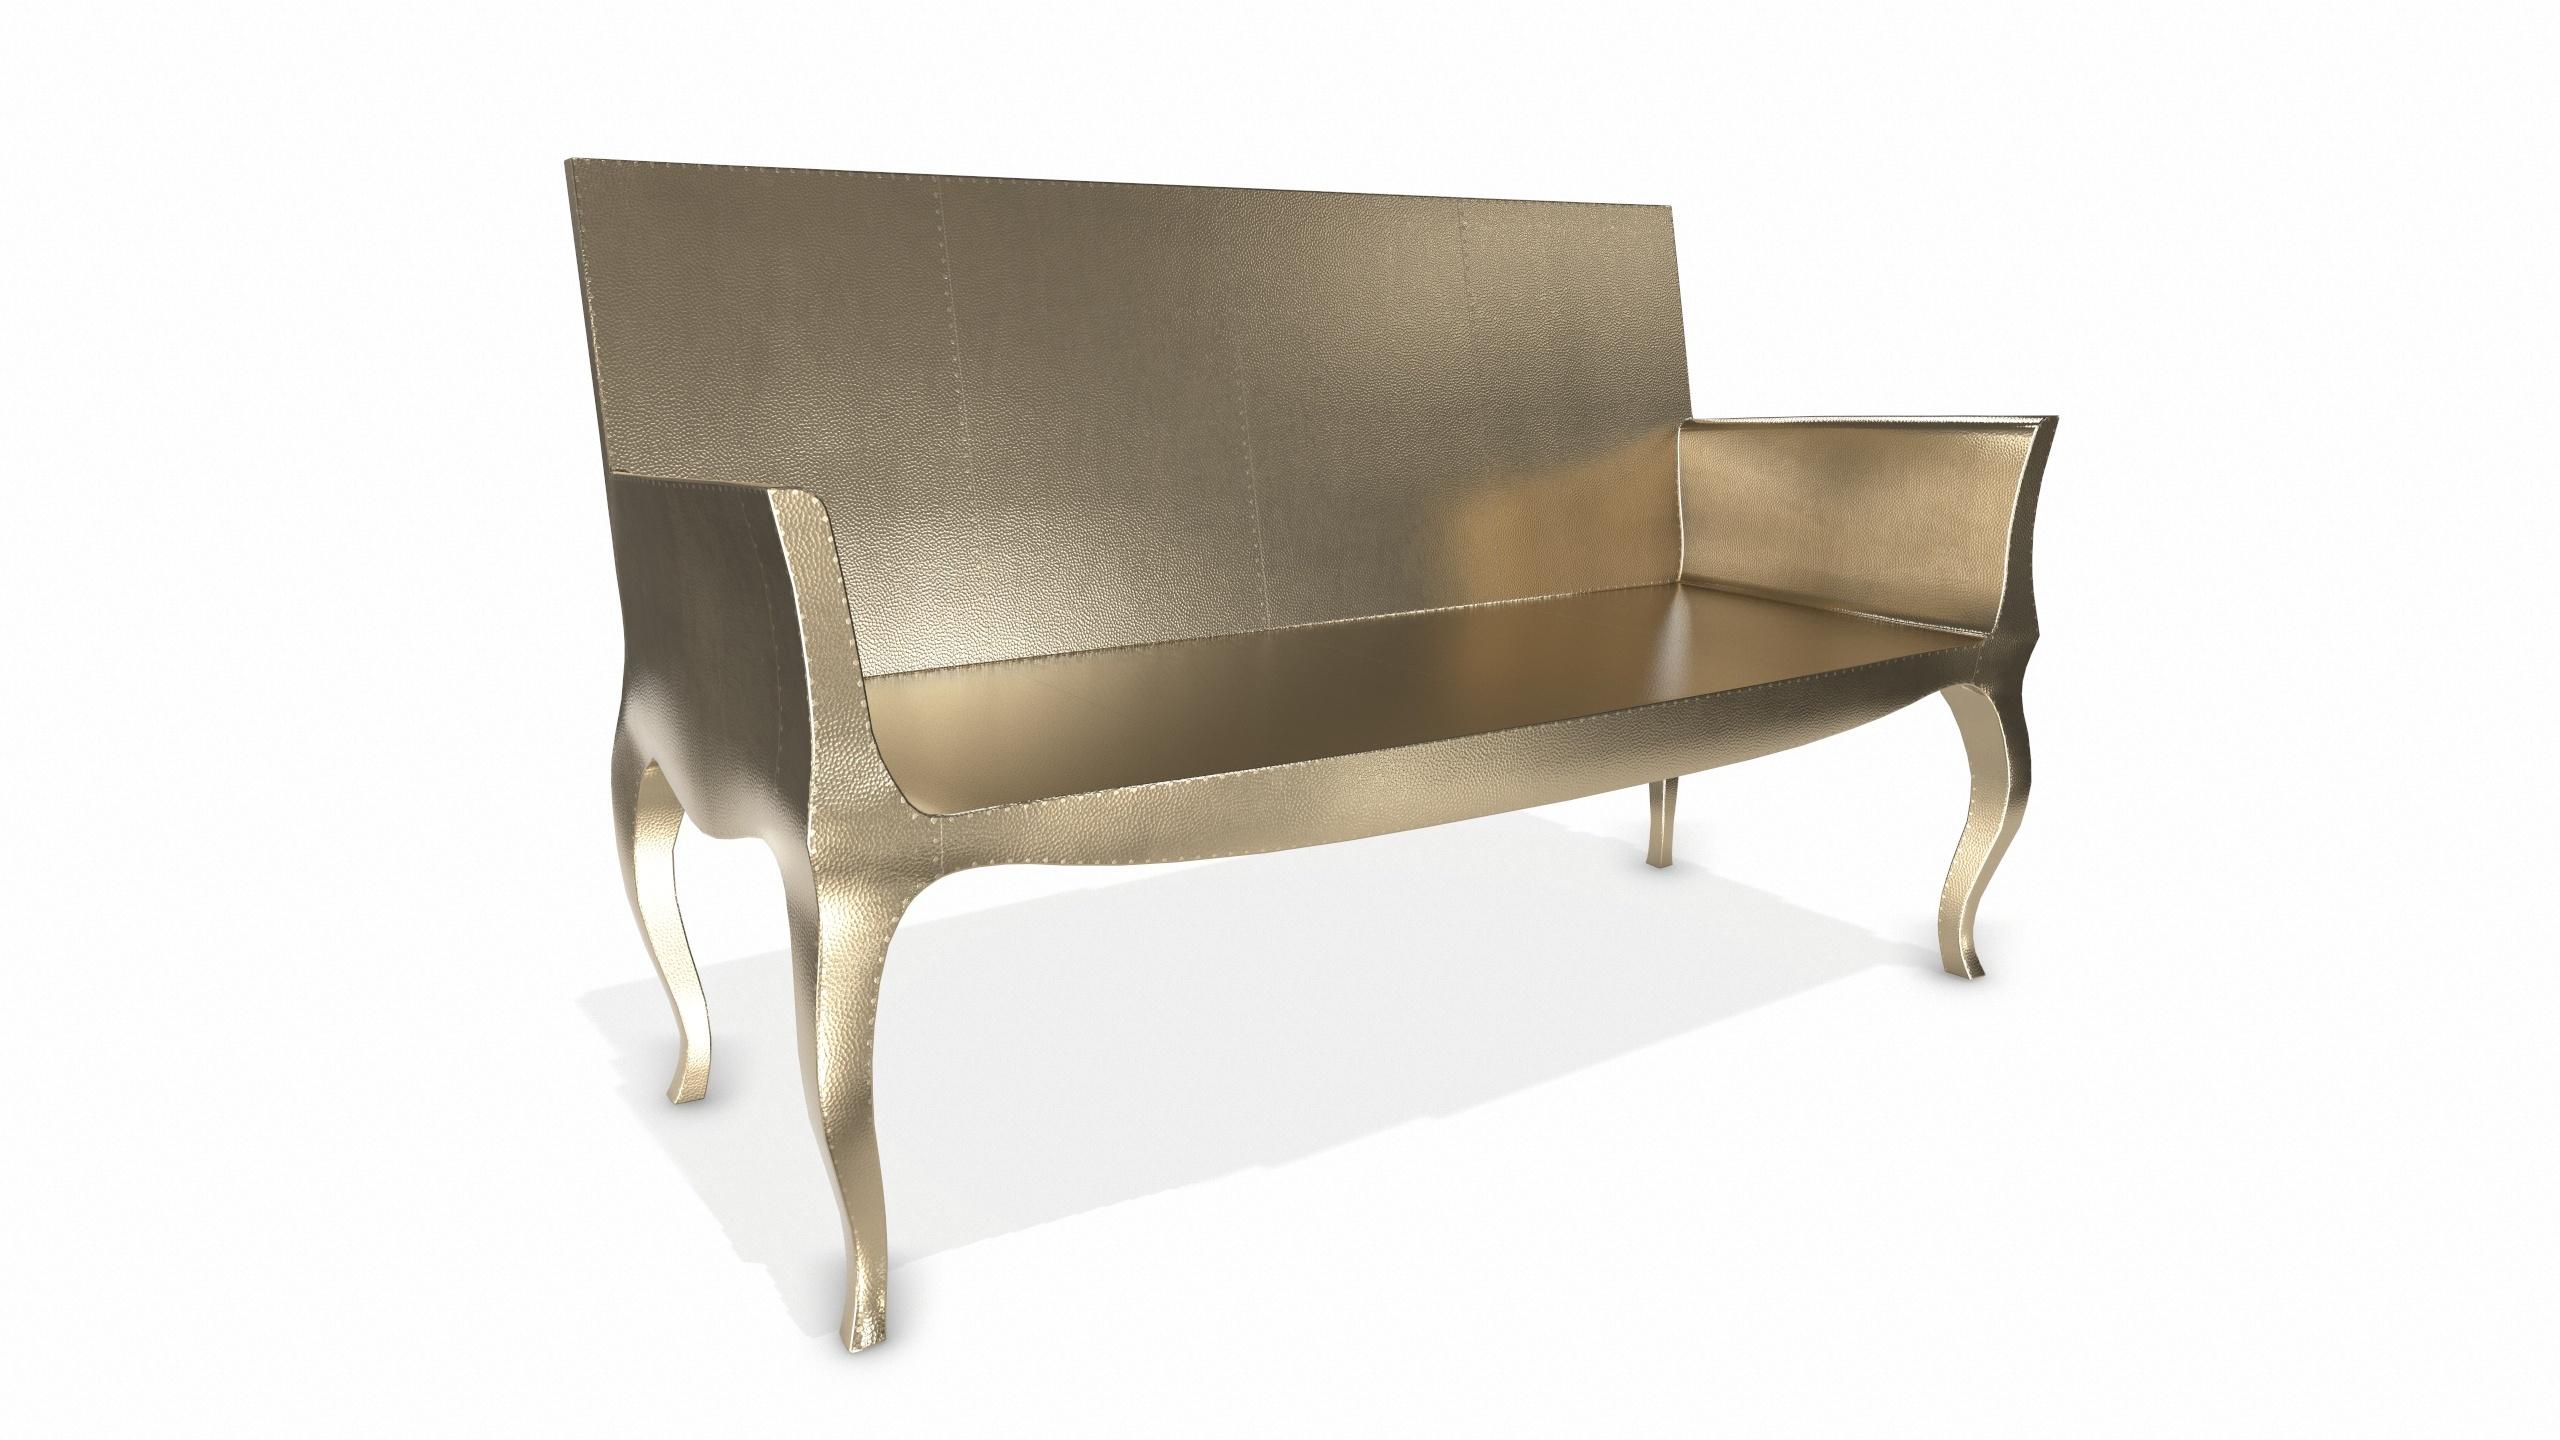 Contemporary Louise Settee Art Deco Canapes in Mid. Hammered Brass by Paul Mathieu For Sale